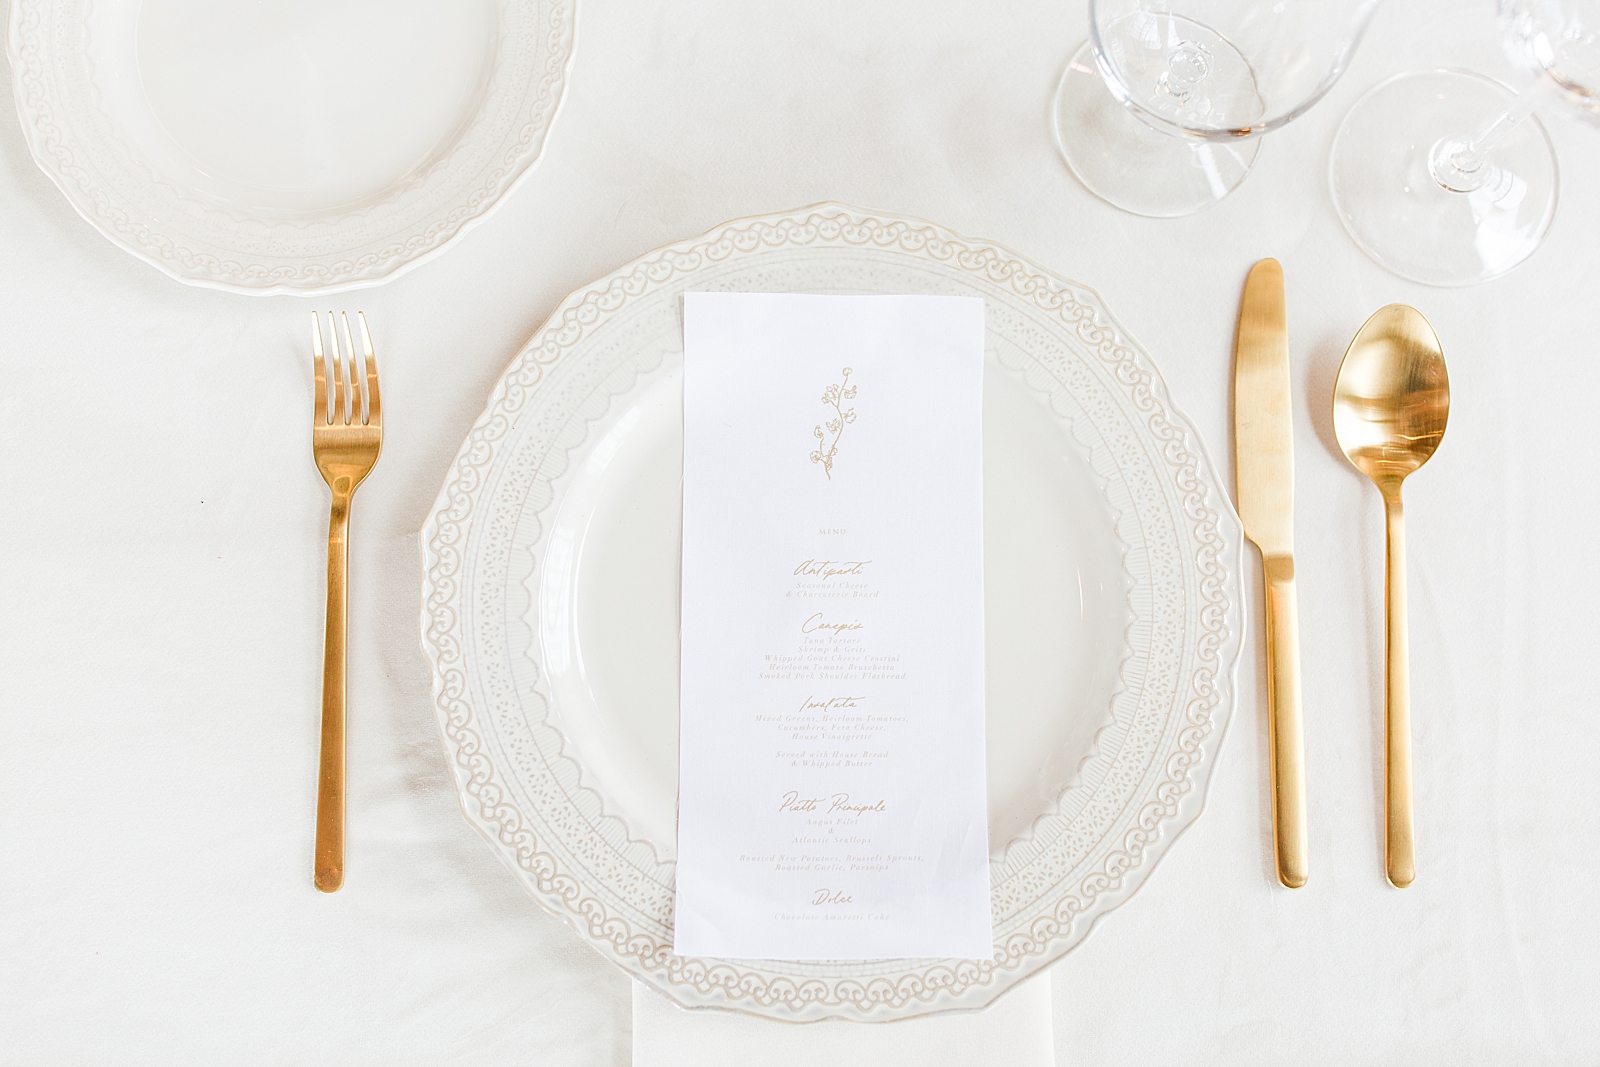 Montaluce Winery Wedding Reception Table Setting Plate Flatware and Dinner menu Photo